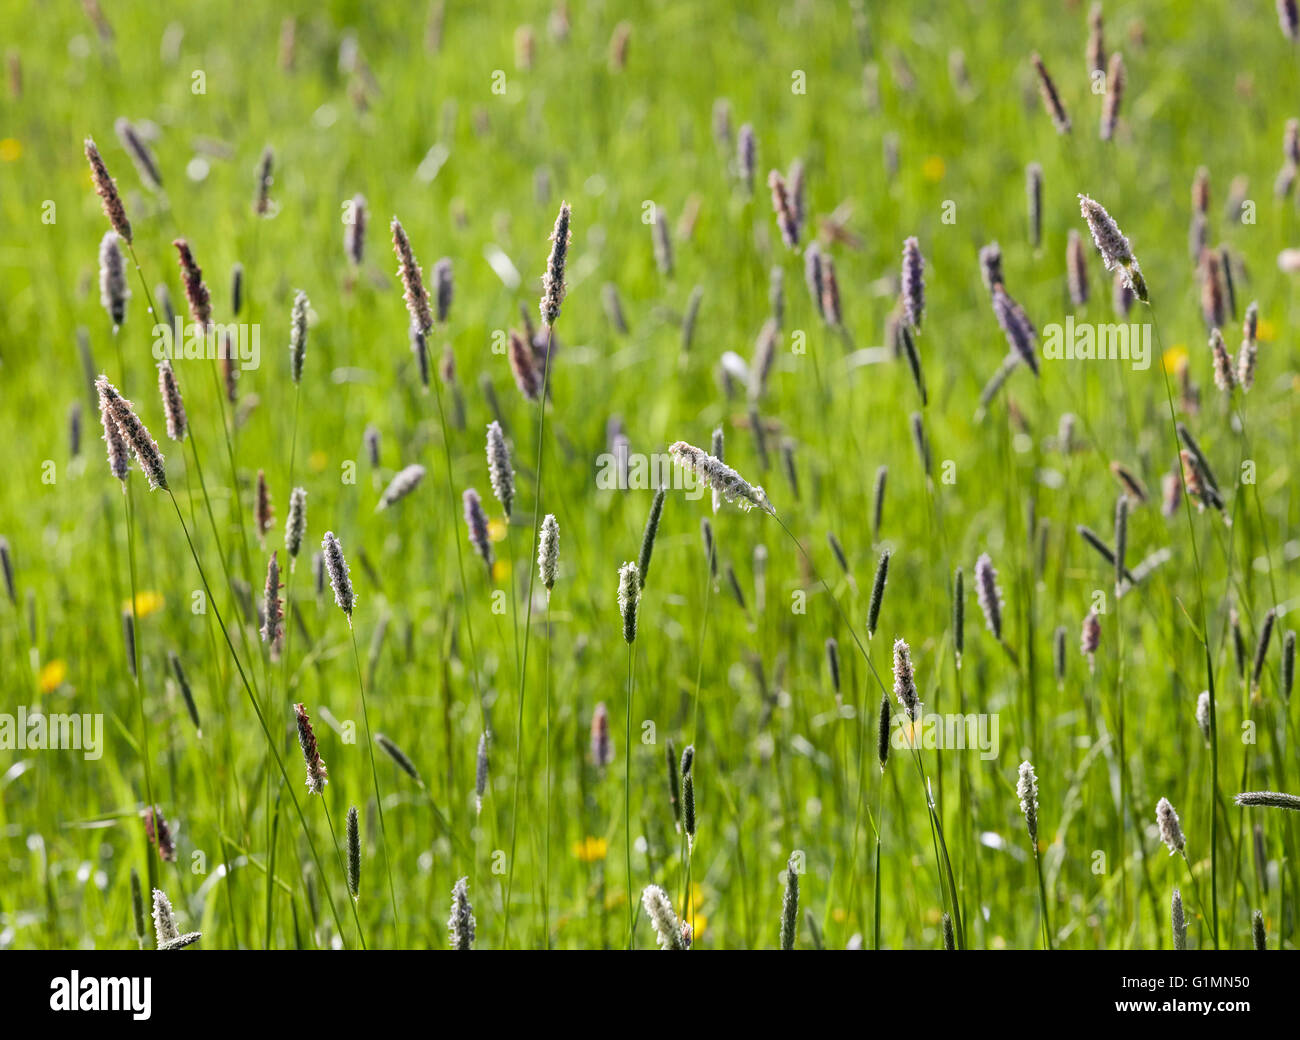 Meadow Foxtail grass. Hurst Meadows, West Molesey, Surrey, England. Stock Photo